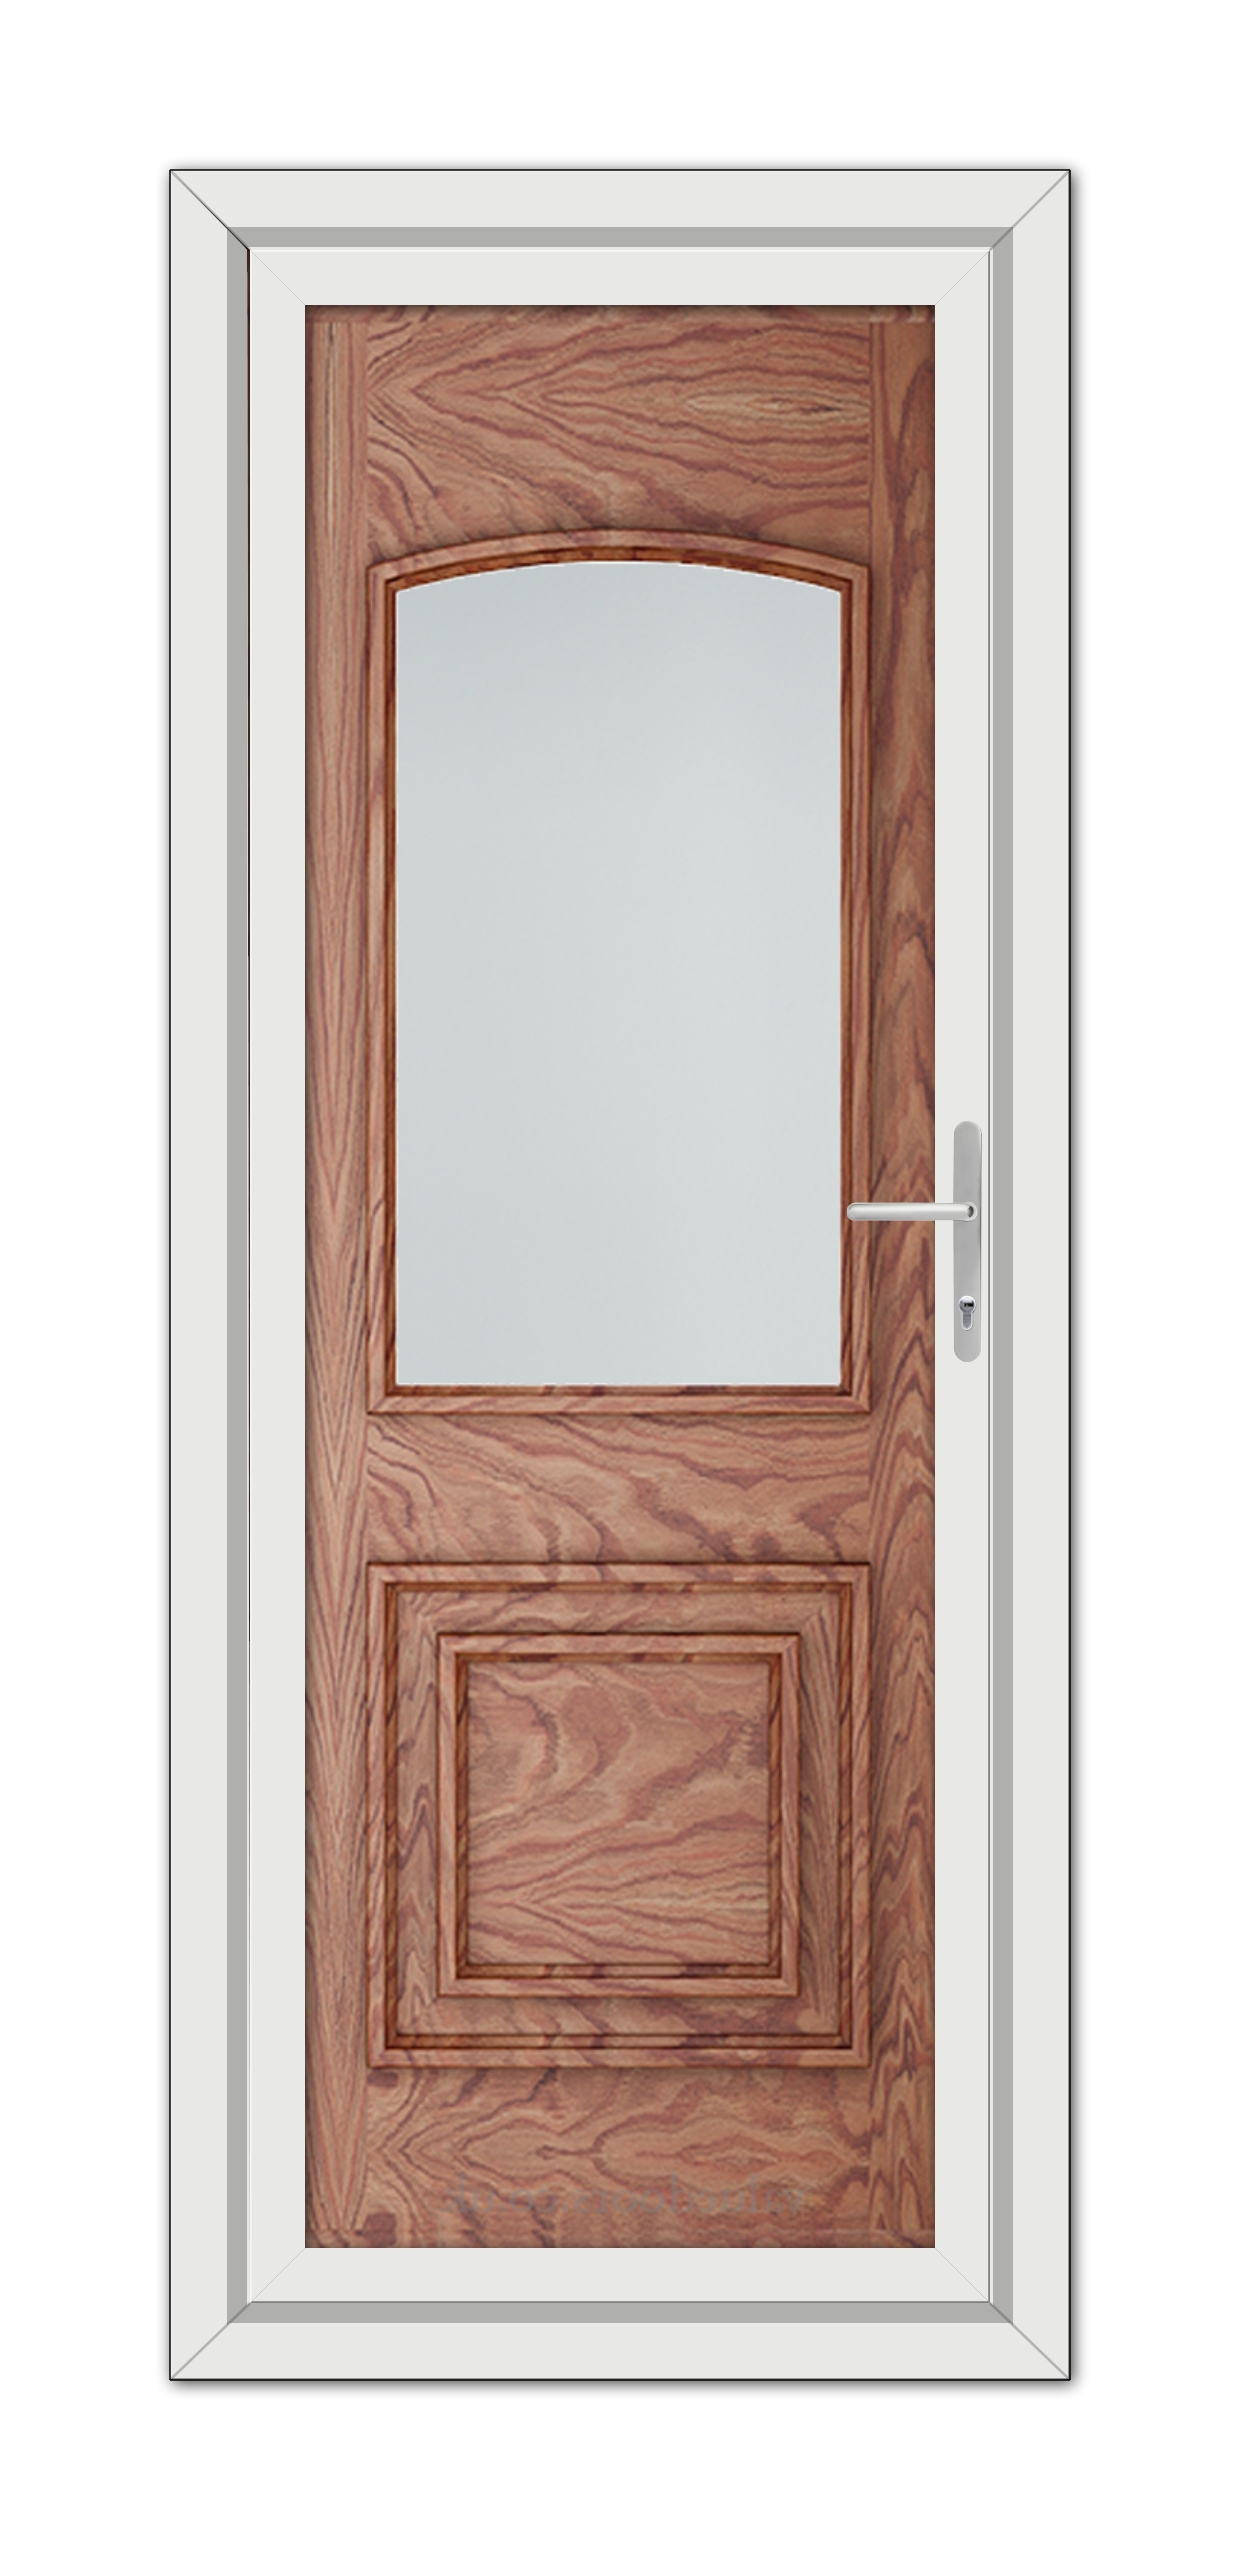 A Solid Oak Balmoral Classic uPVC Door with a rectangular window, framed in white, featuring a modern handle on the right side.